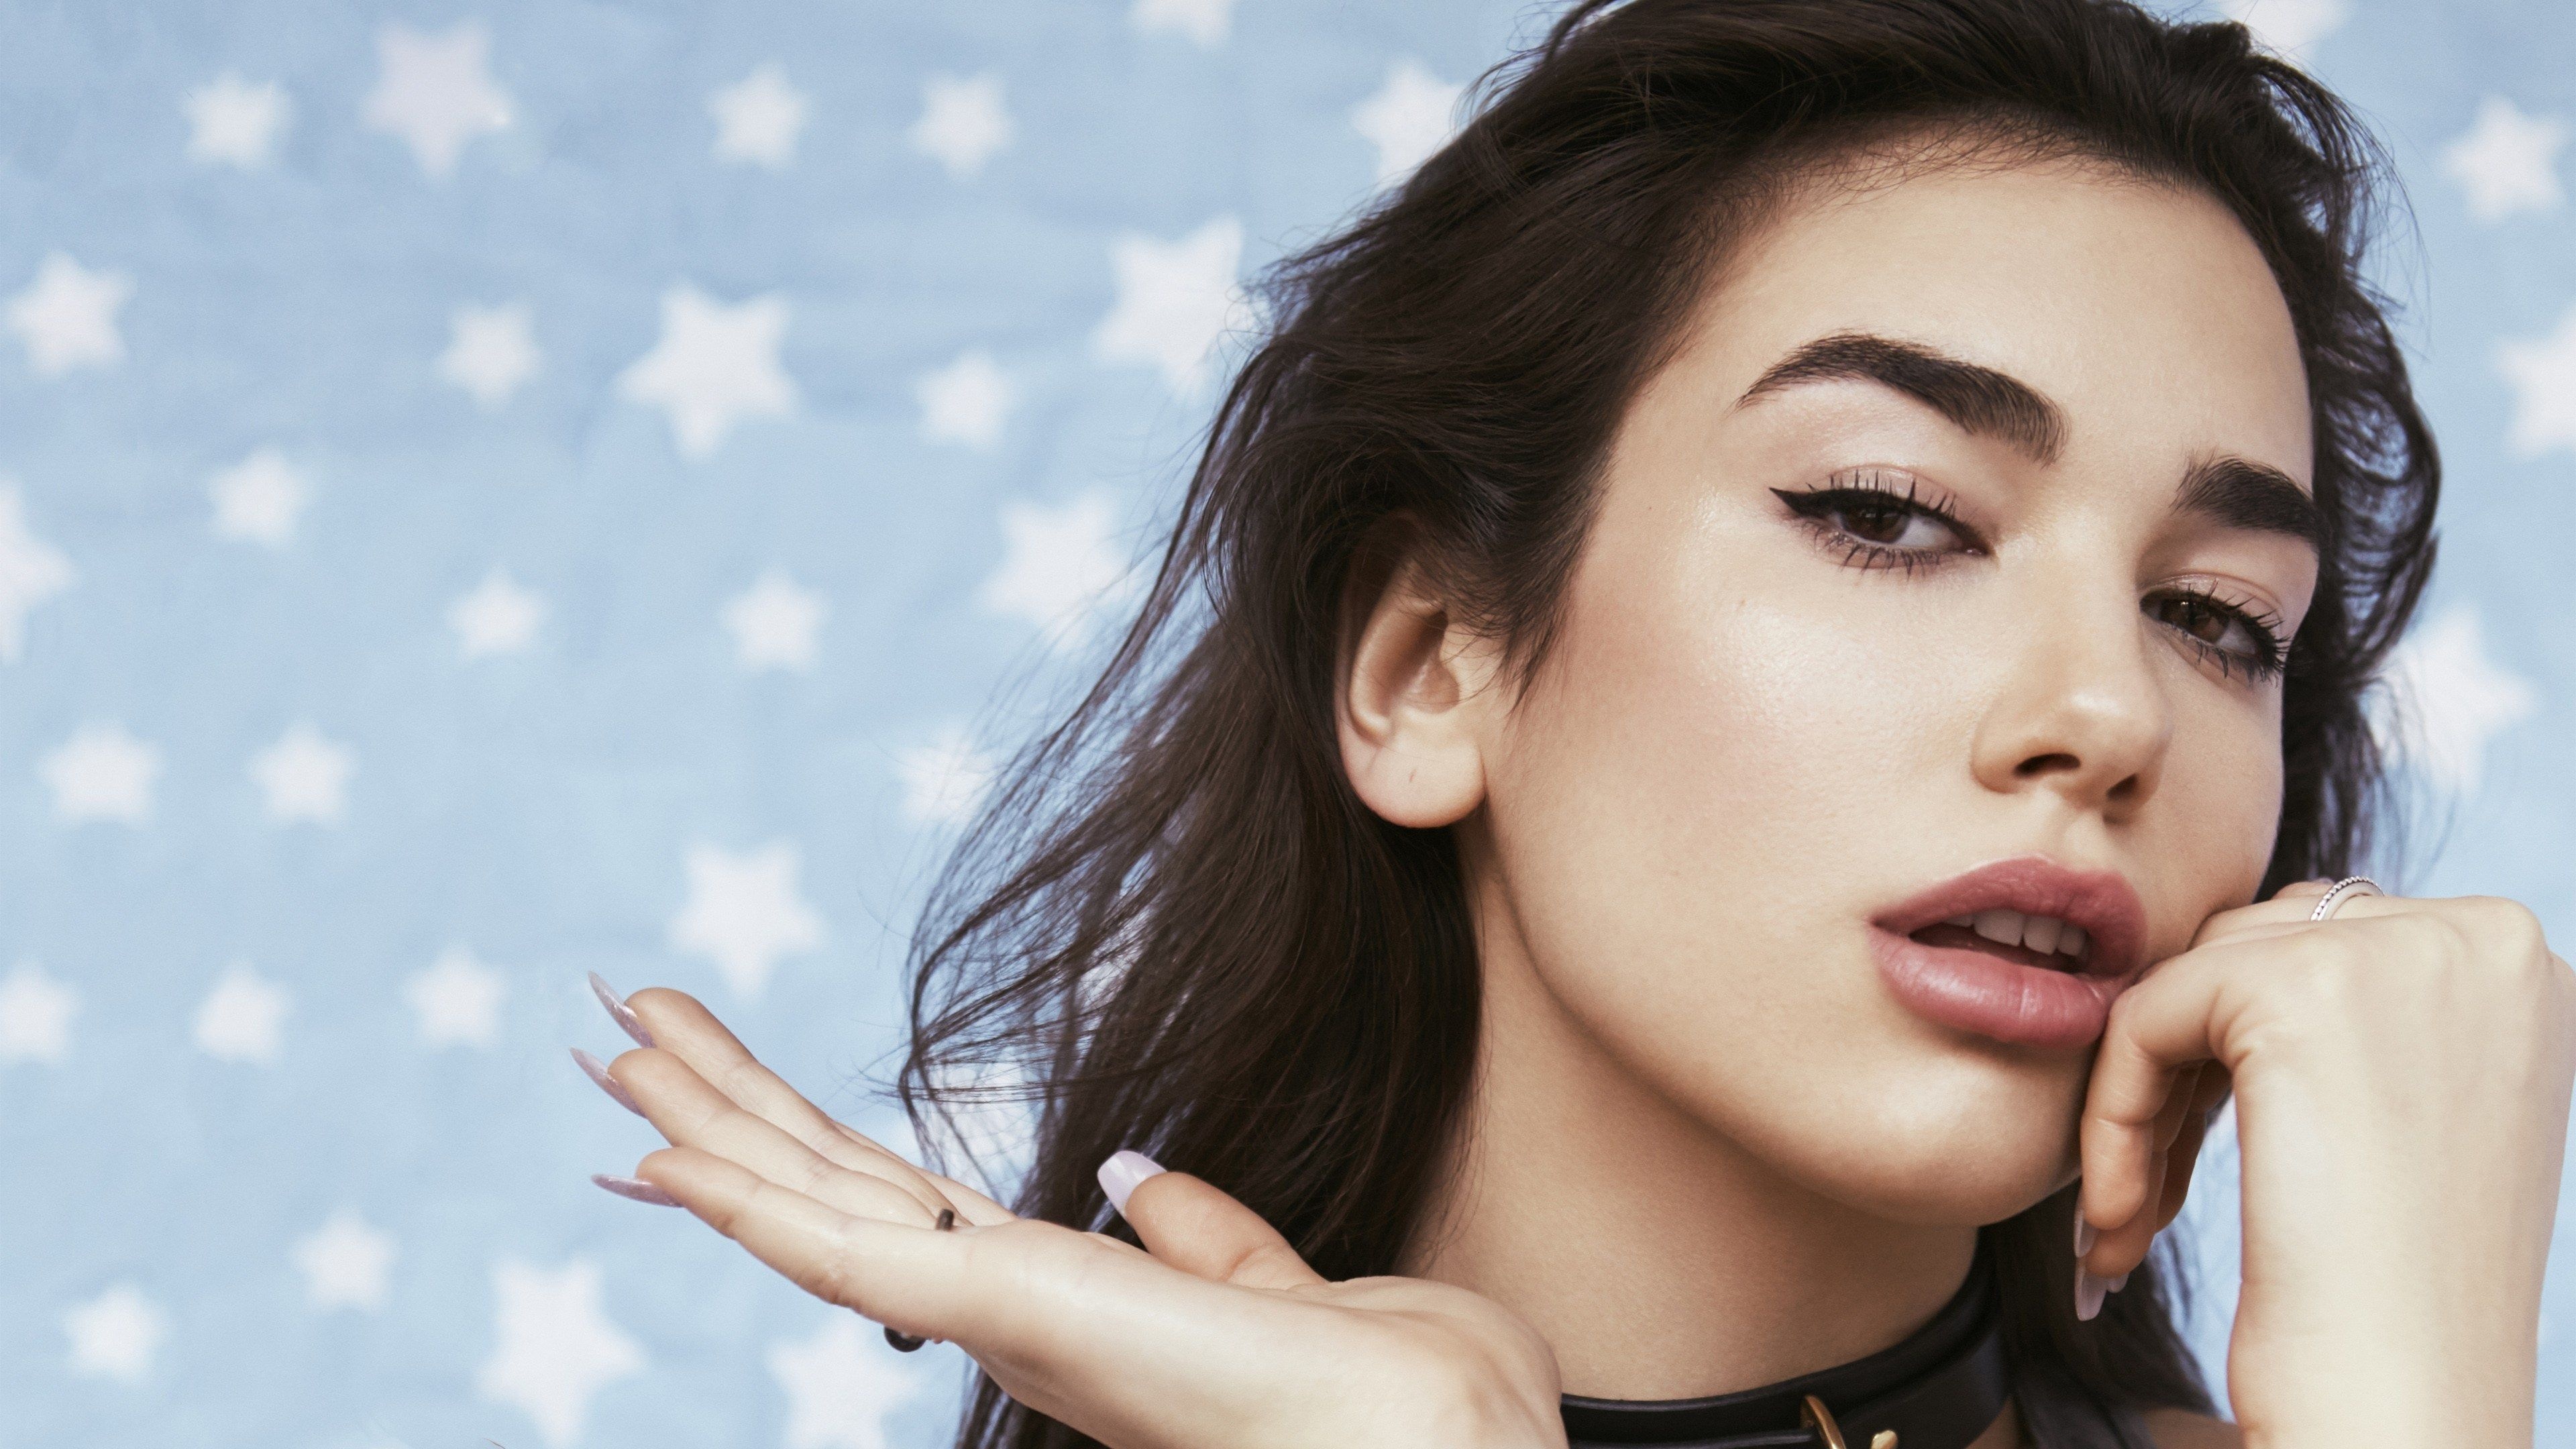 Charli XCX: Featured on the song "Fancy" by rapper Iggy Azalea. 3840x2160 4K Background.